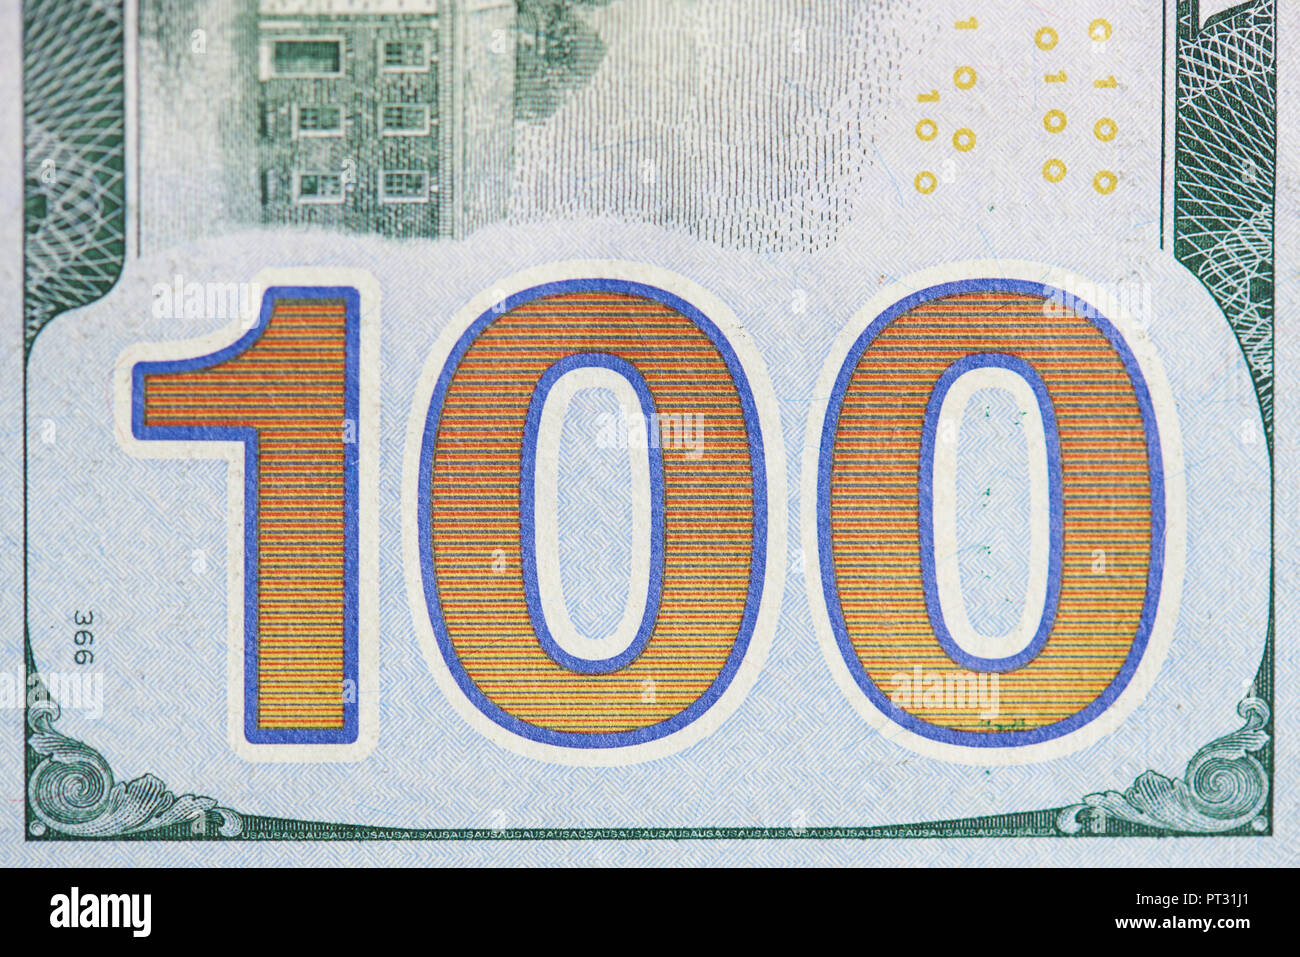 100 number on dollar bill close up view. America money theme Stock Photo